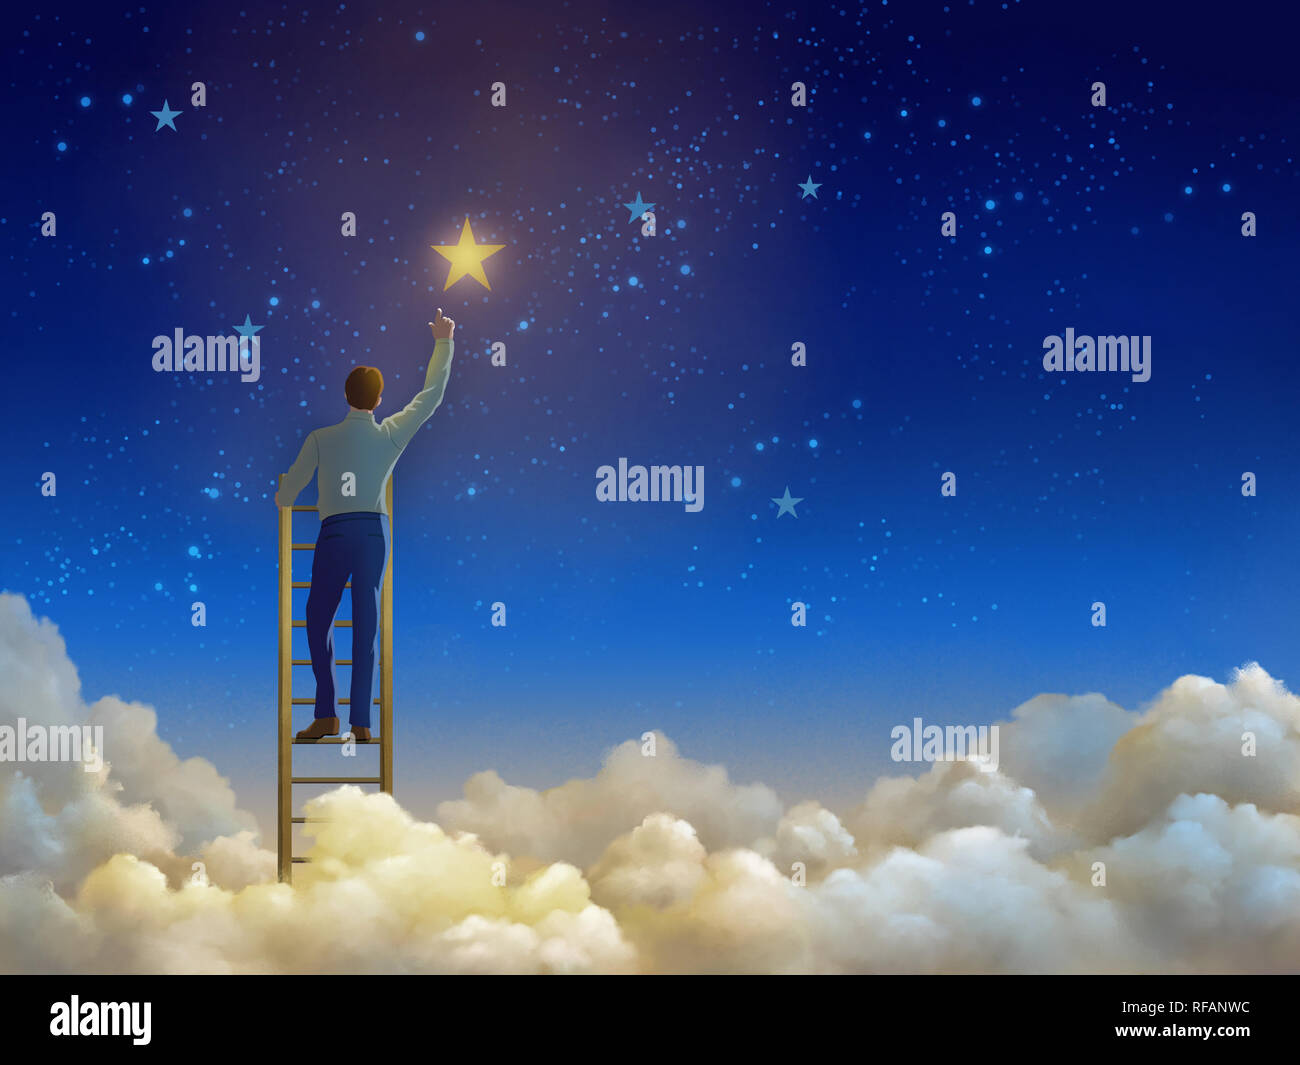 Man climbing a ladder over the clouds and reaching for the stars. Digital illustration. Stock Photo